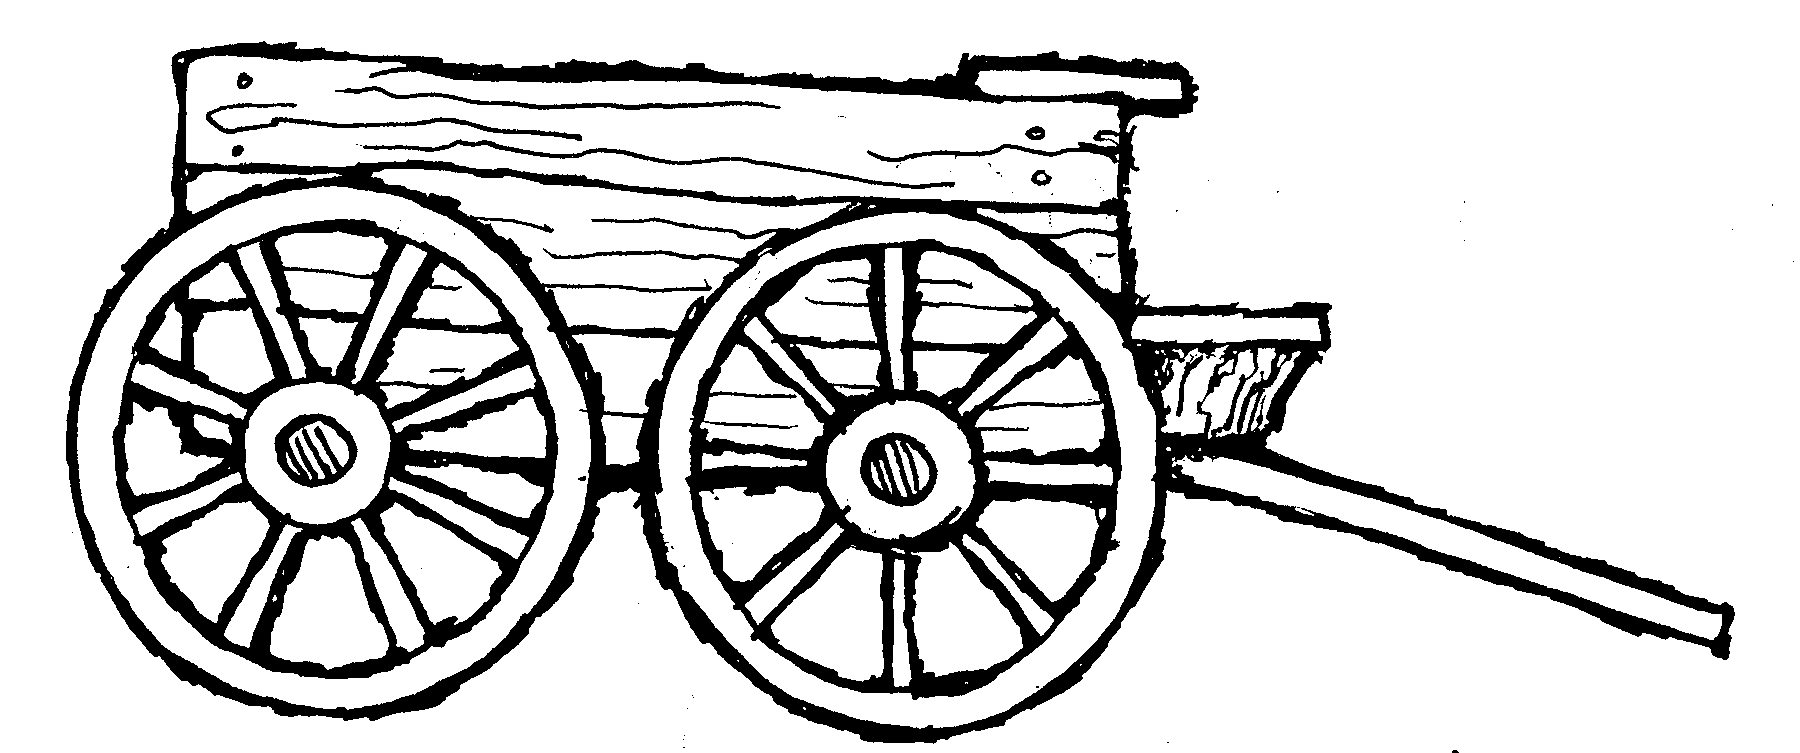 Pioneer Tools Wagon | LDS Clipart and Handouts from JennySmith.